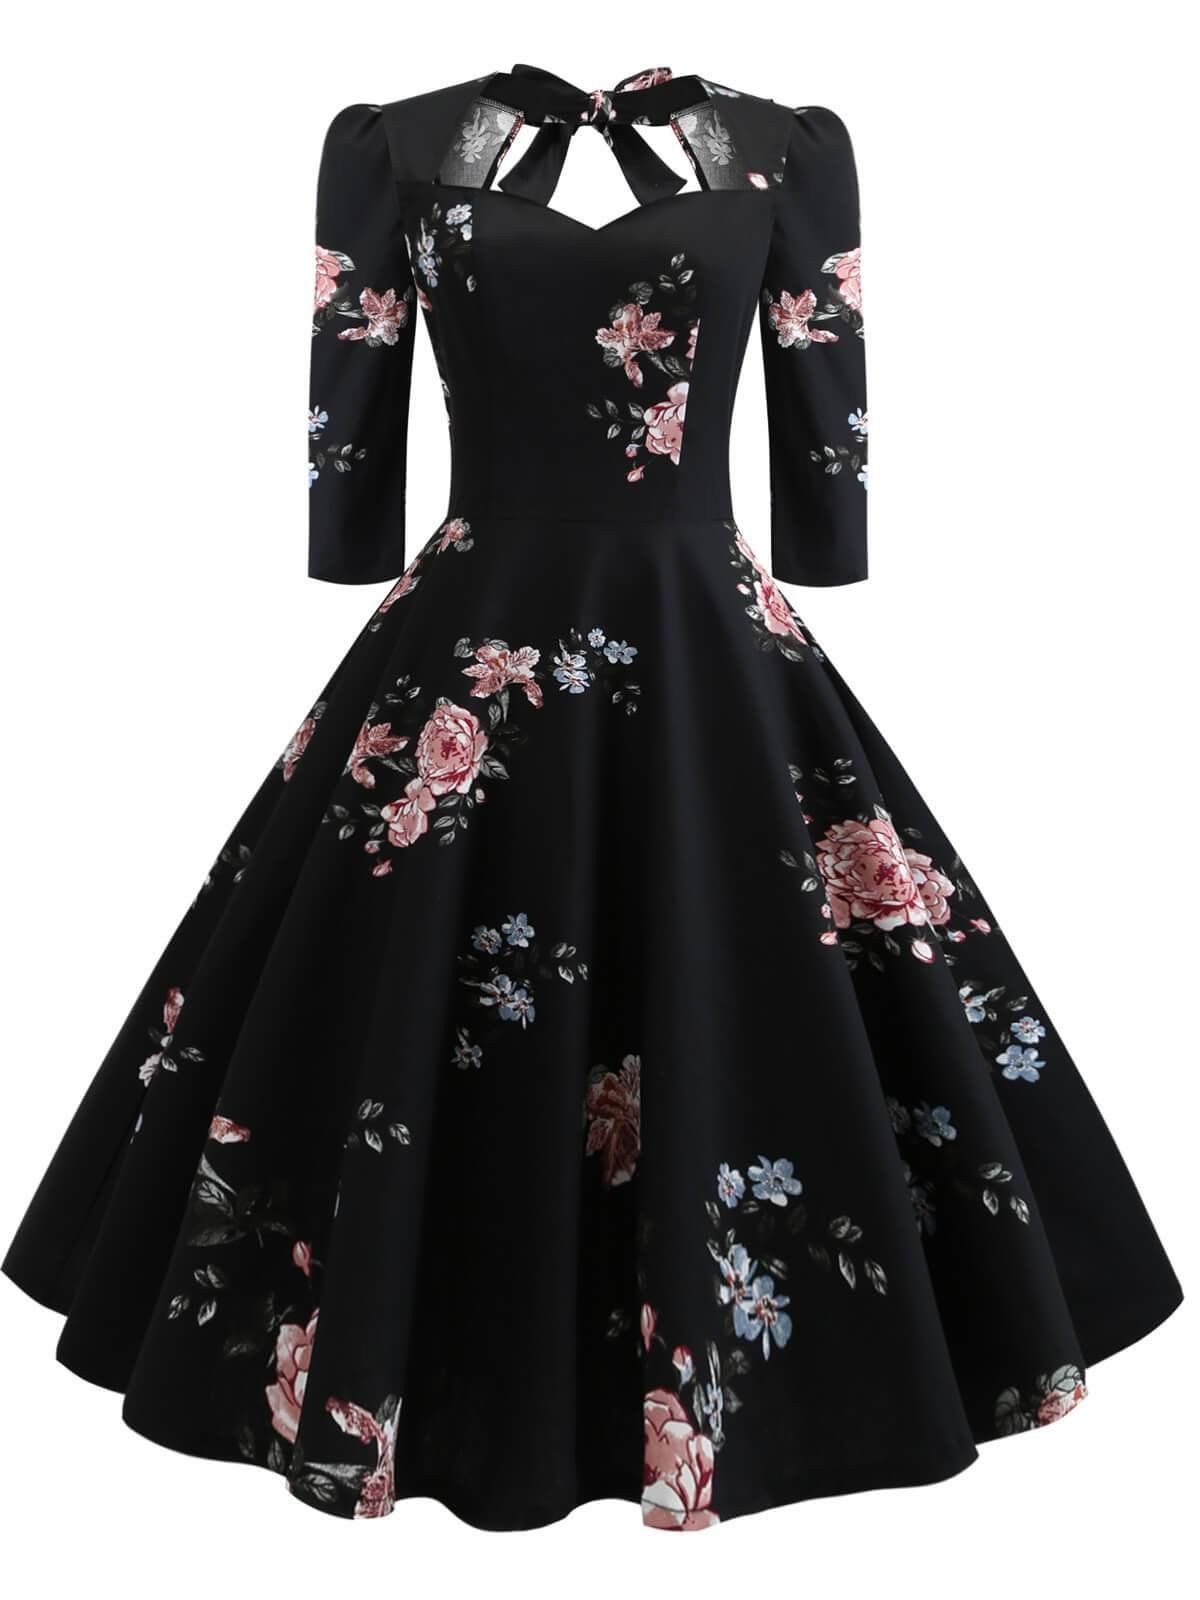 1950s Floral Lace Up Swing Dress - 1950s Floral Lace Up Swing Dress -   19 beauty Fashion dresses ideas